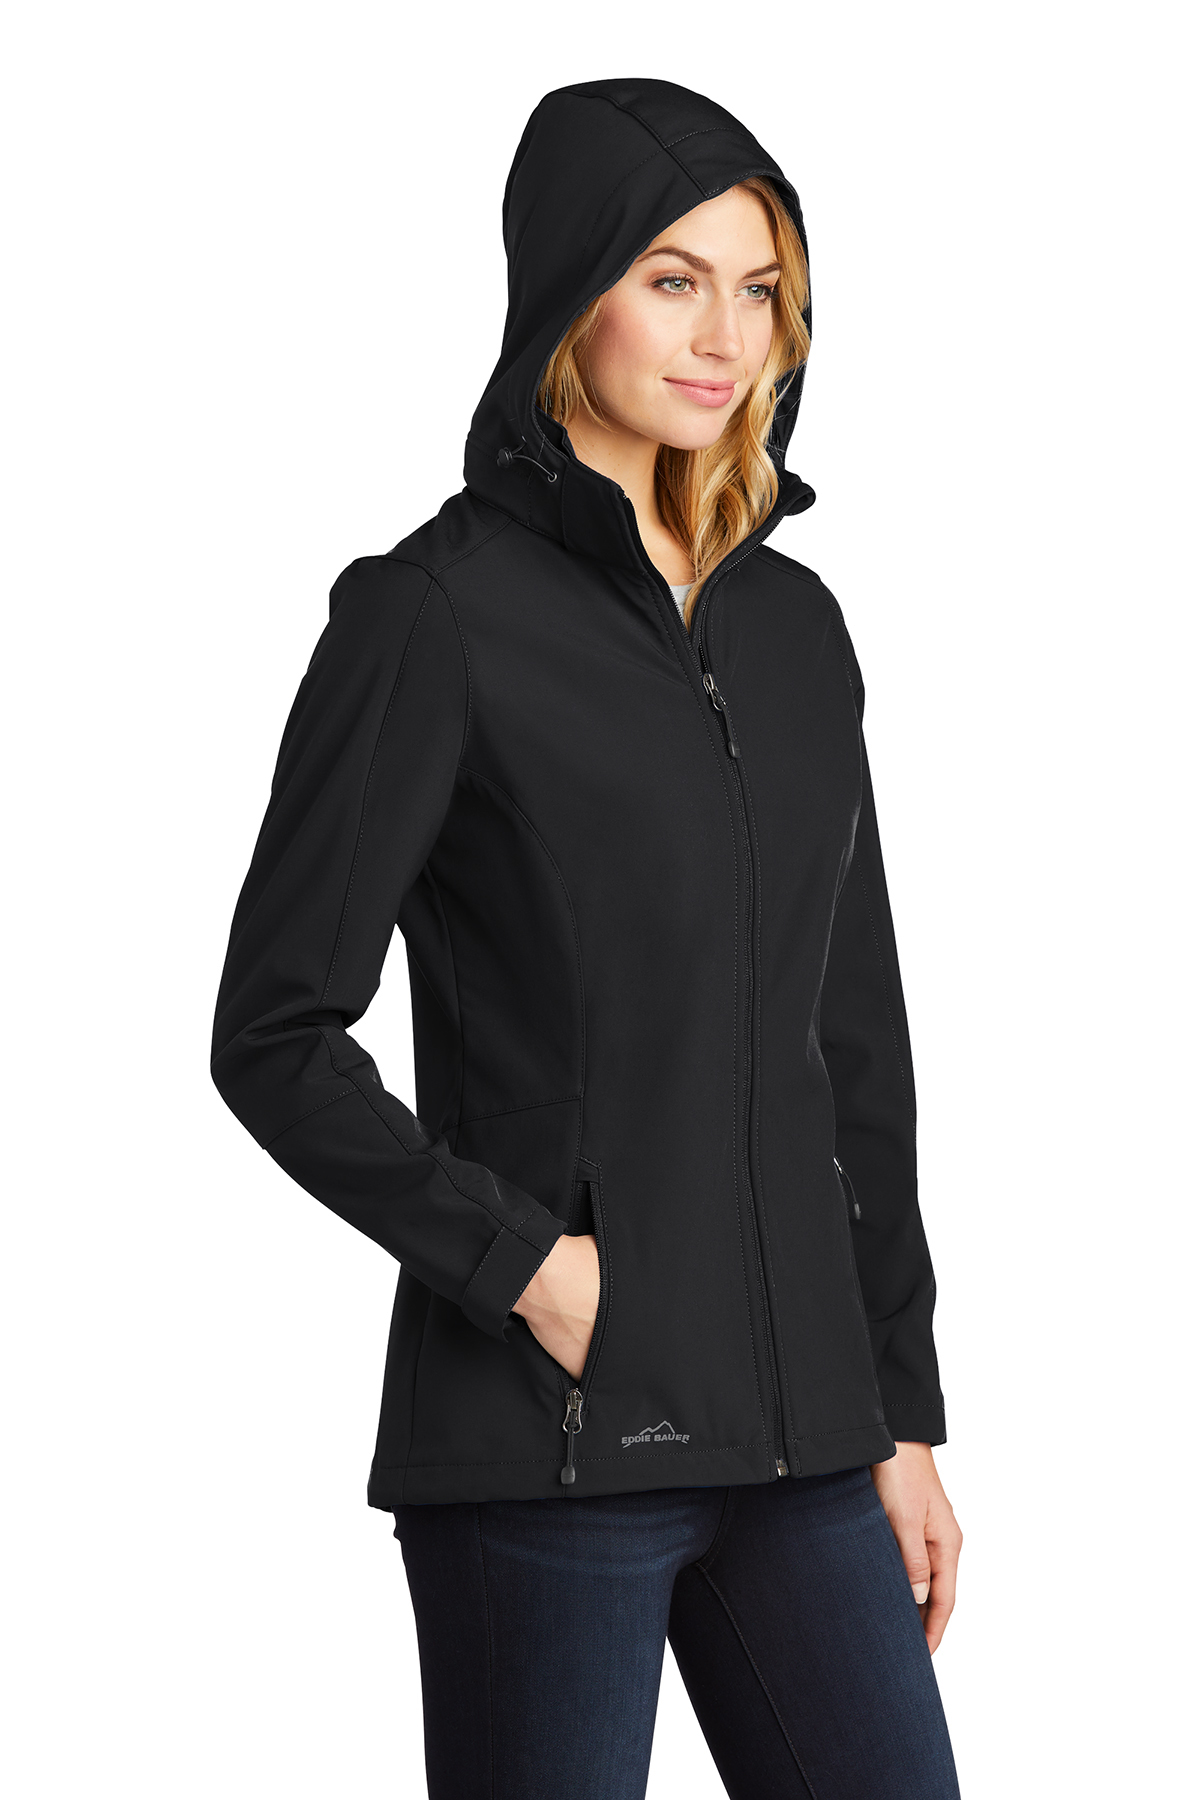 Eddie Bauer Ladies Hooded Soft Shell Parka | Product | Company Casuals